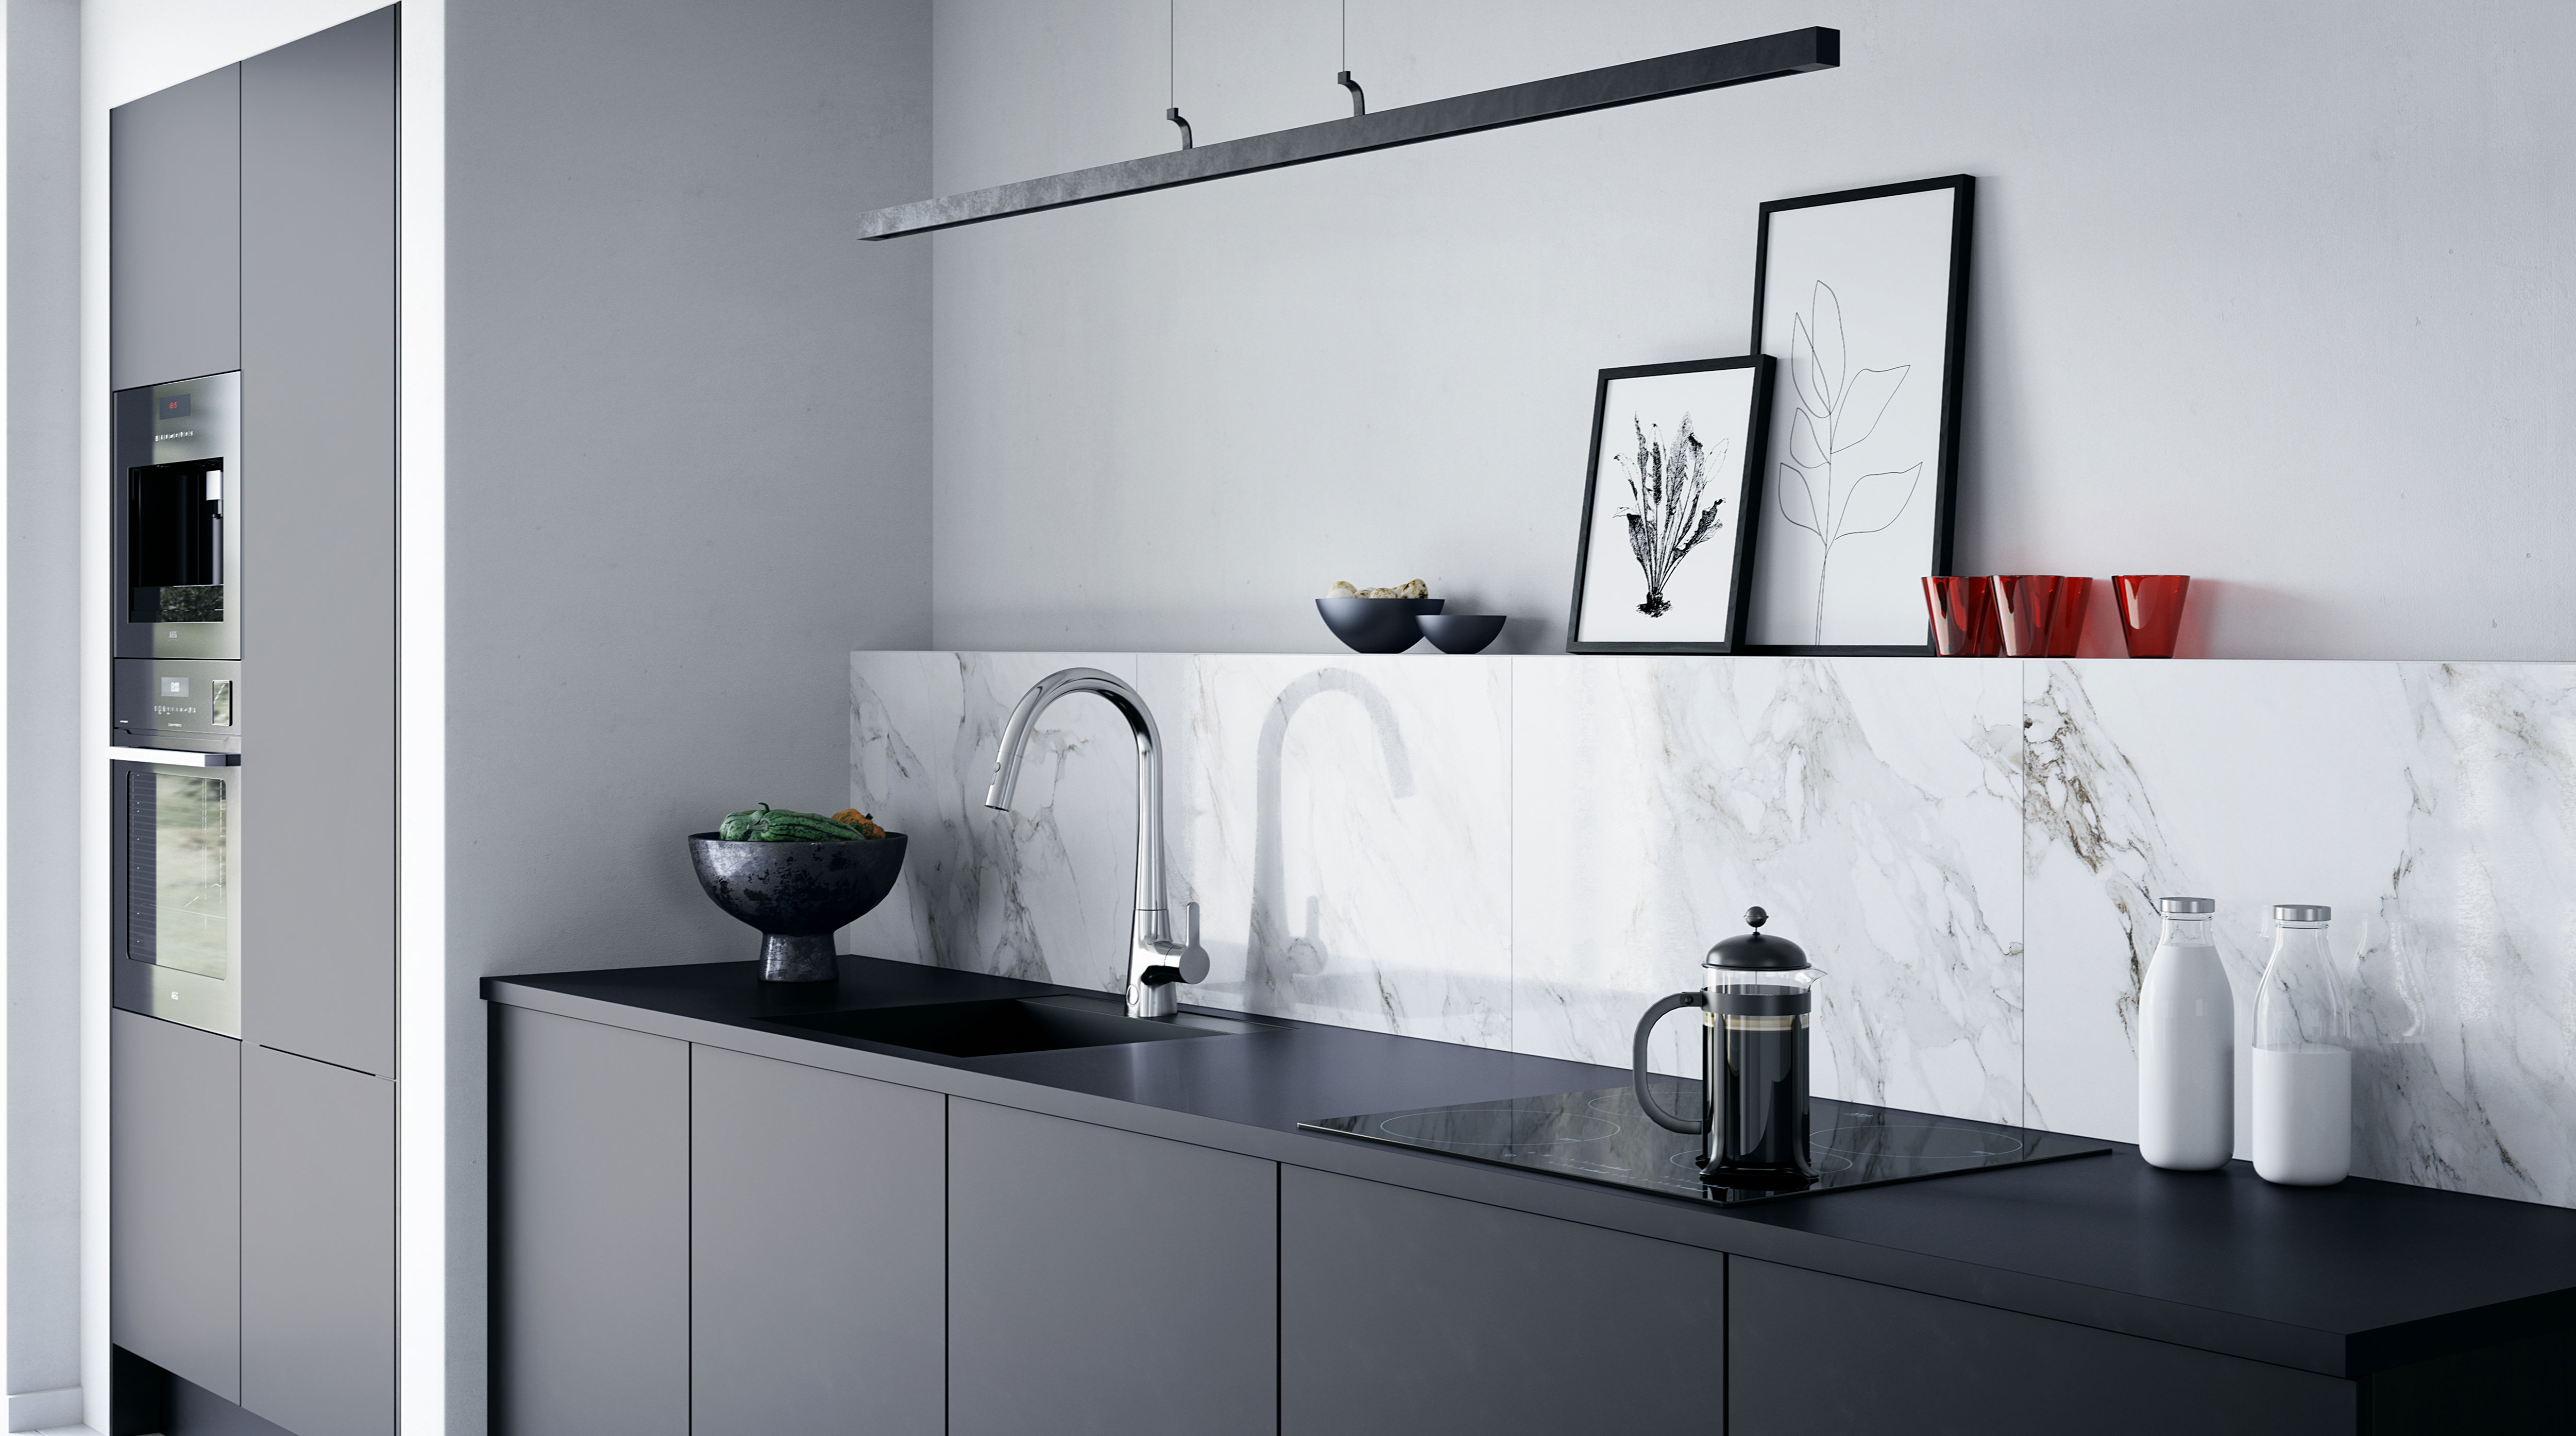 The Oras Inspera kitchen faucet is also available with a handy pull-down spout.